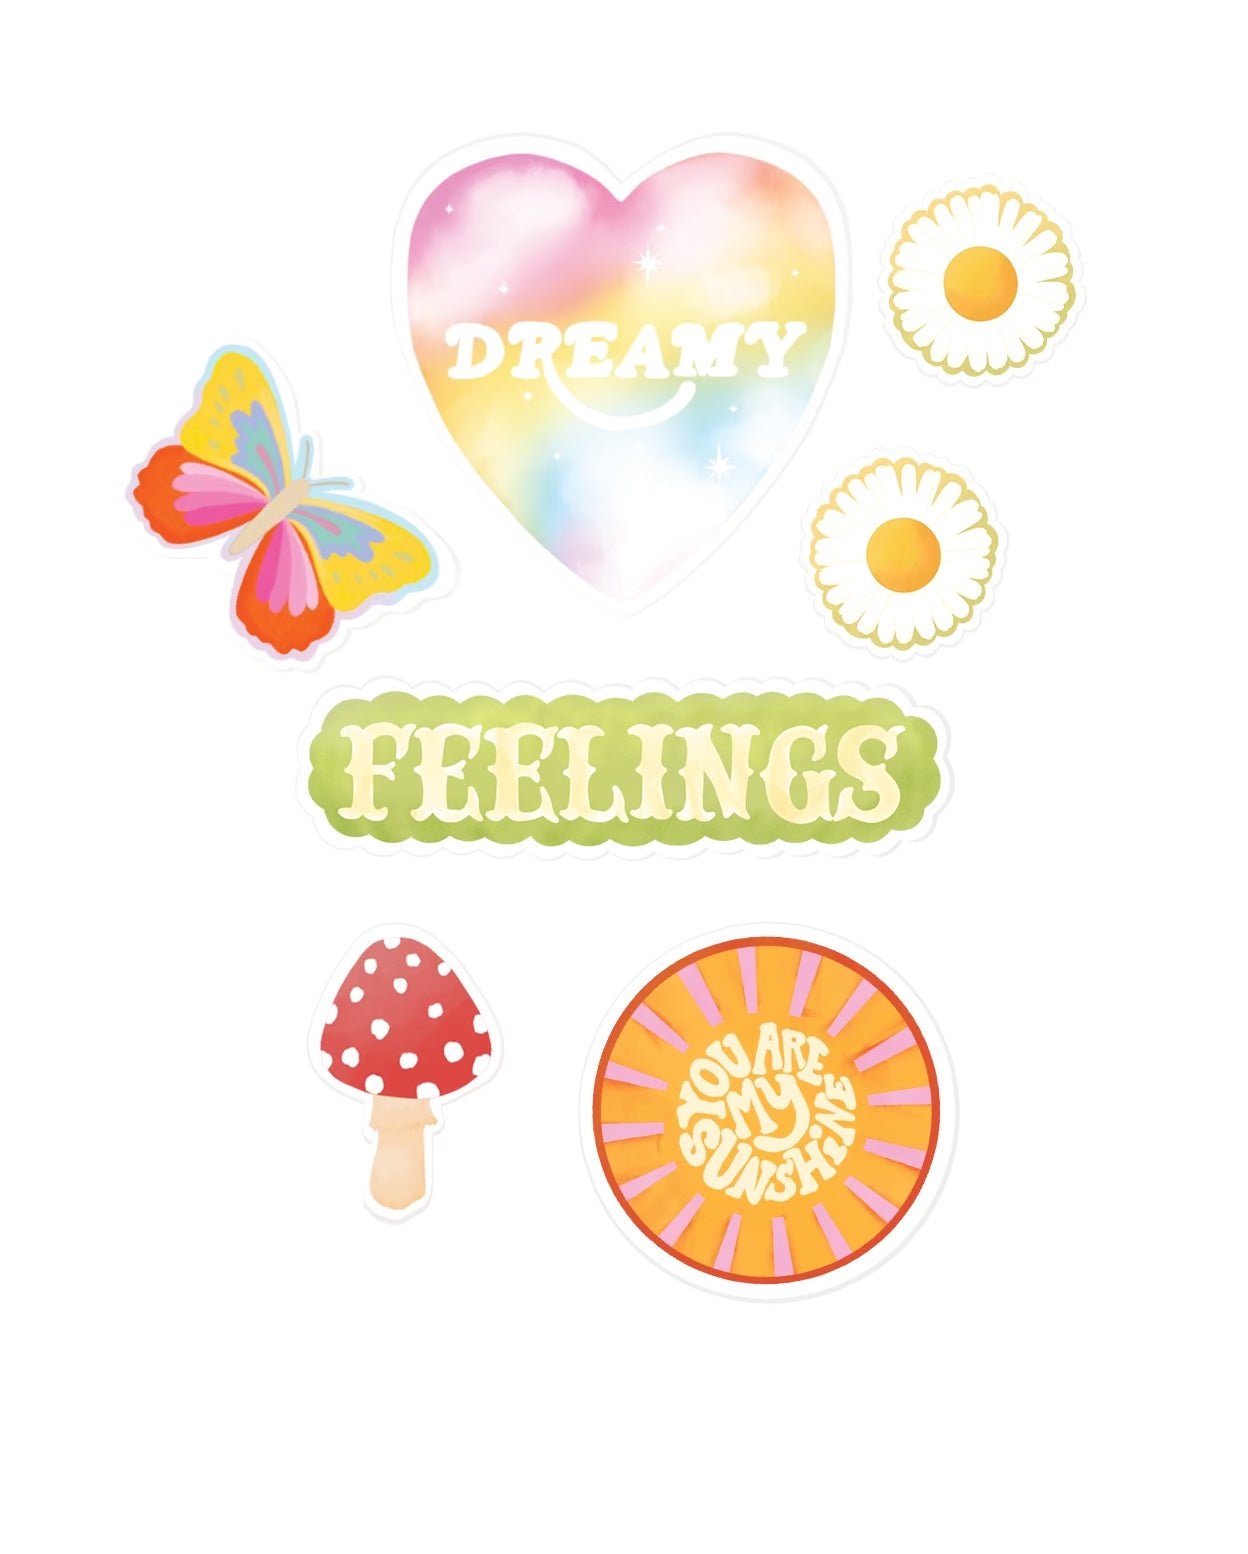 6 new Adelfi stickers: colorful butterfly, the word 'Feelings' in all caps, two daisies, the words 'you are my sunshine' in a sun, red mushroom, and the word 'Dreamy' in a heart